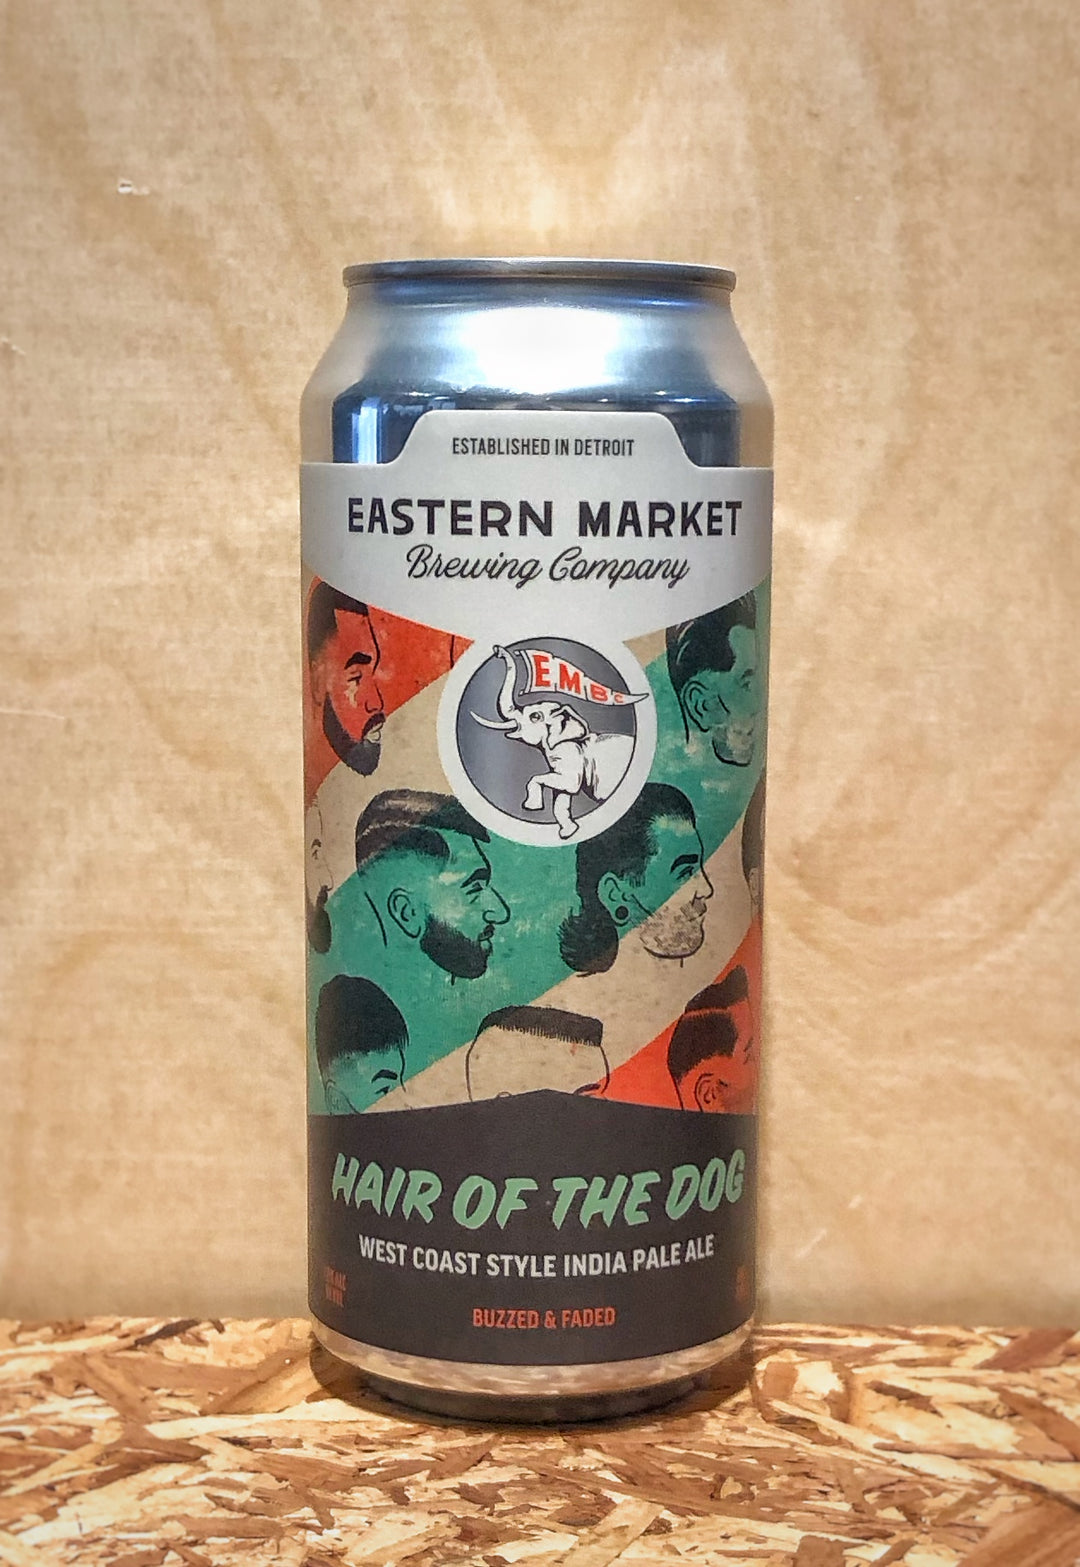 Eastern Market Brewing Co. 'Hair of the Dog' West Coast Style IPA (Detroit, MI)